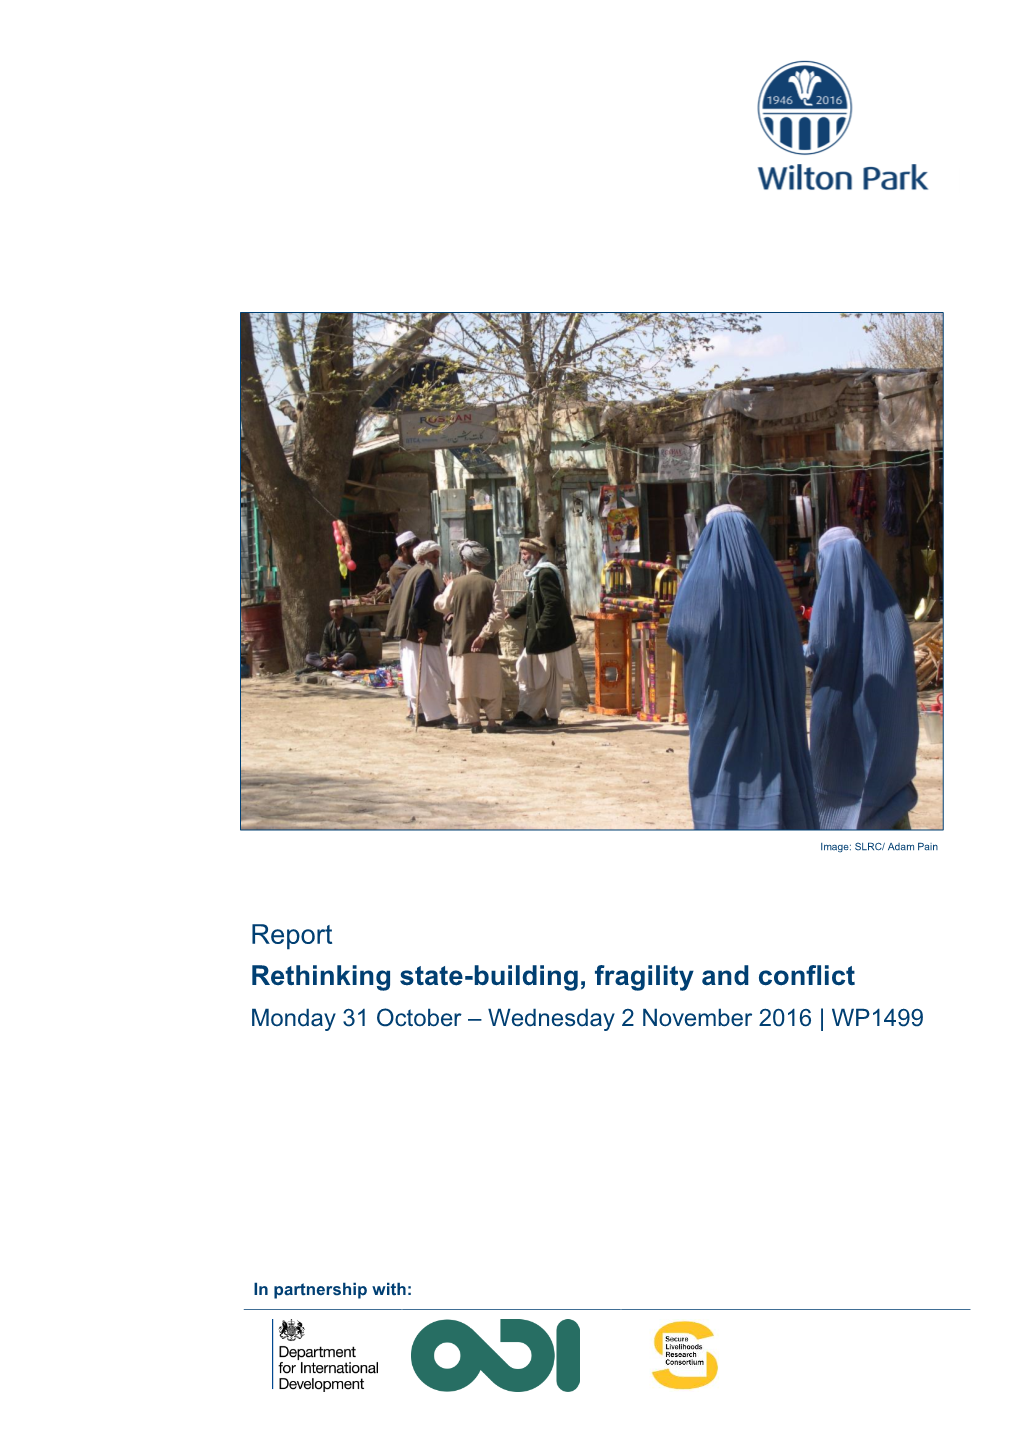 Rethinking State-Building, Fragility and Conflict Monday 31 October – Wednesday 2 November 2016 | WP1499